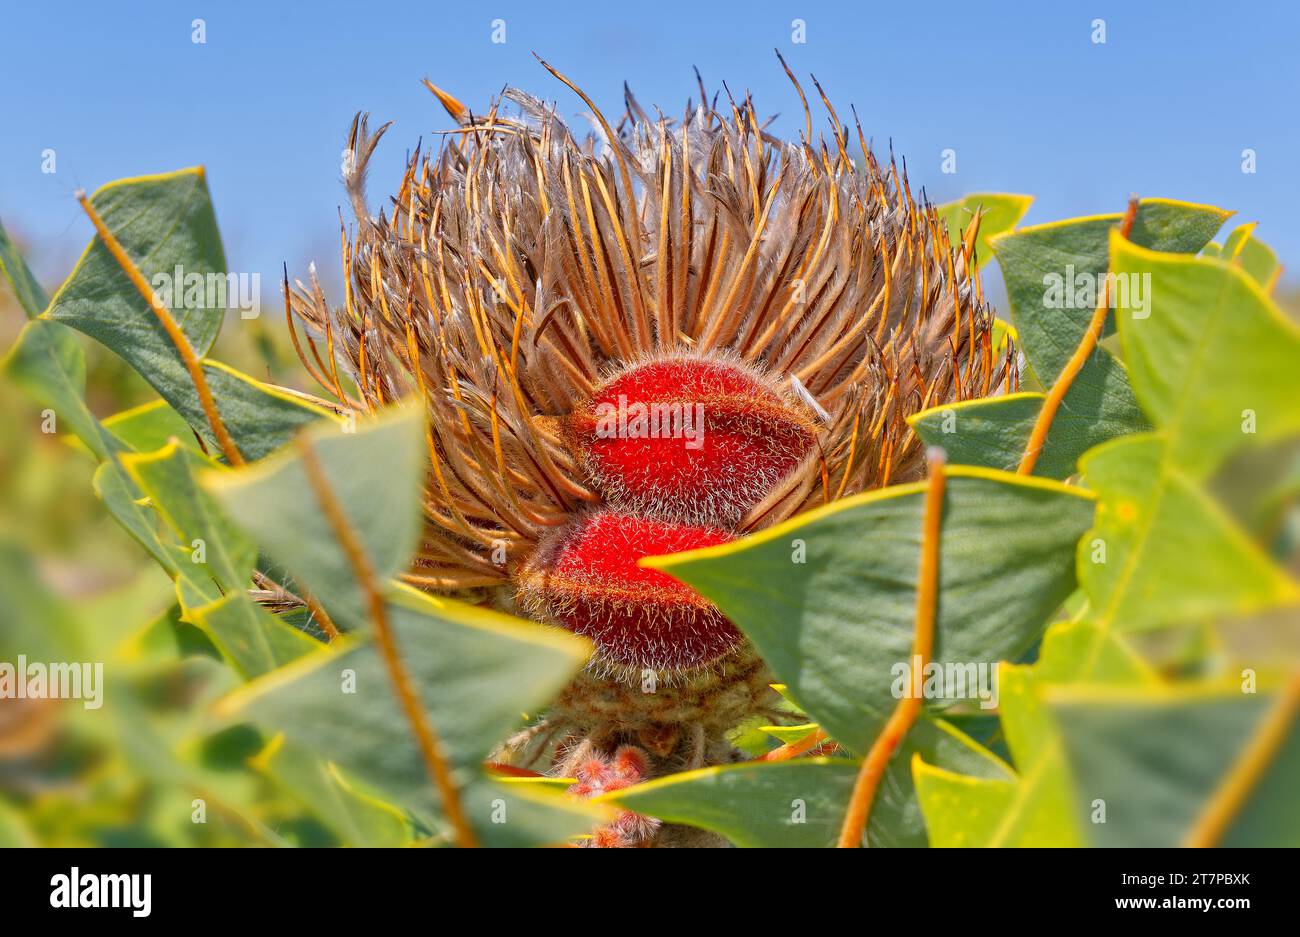 Close up view of Banksia baxteri seed capsule on old flower head with spiky leaves at Fitzgerald River National Park, Western Australia, Australia Stock Photo